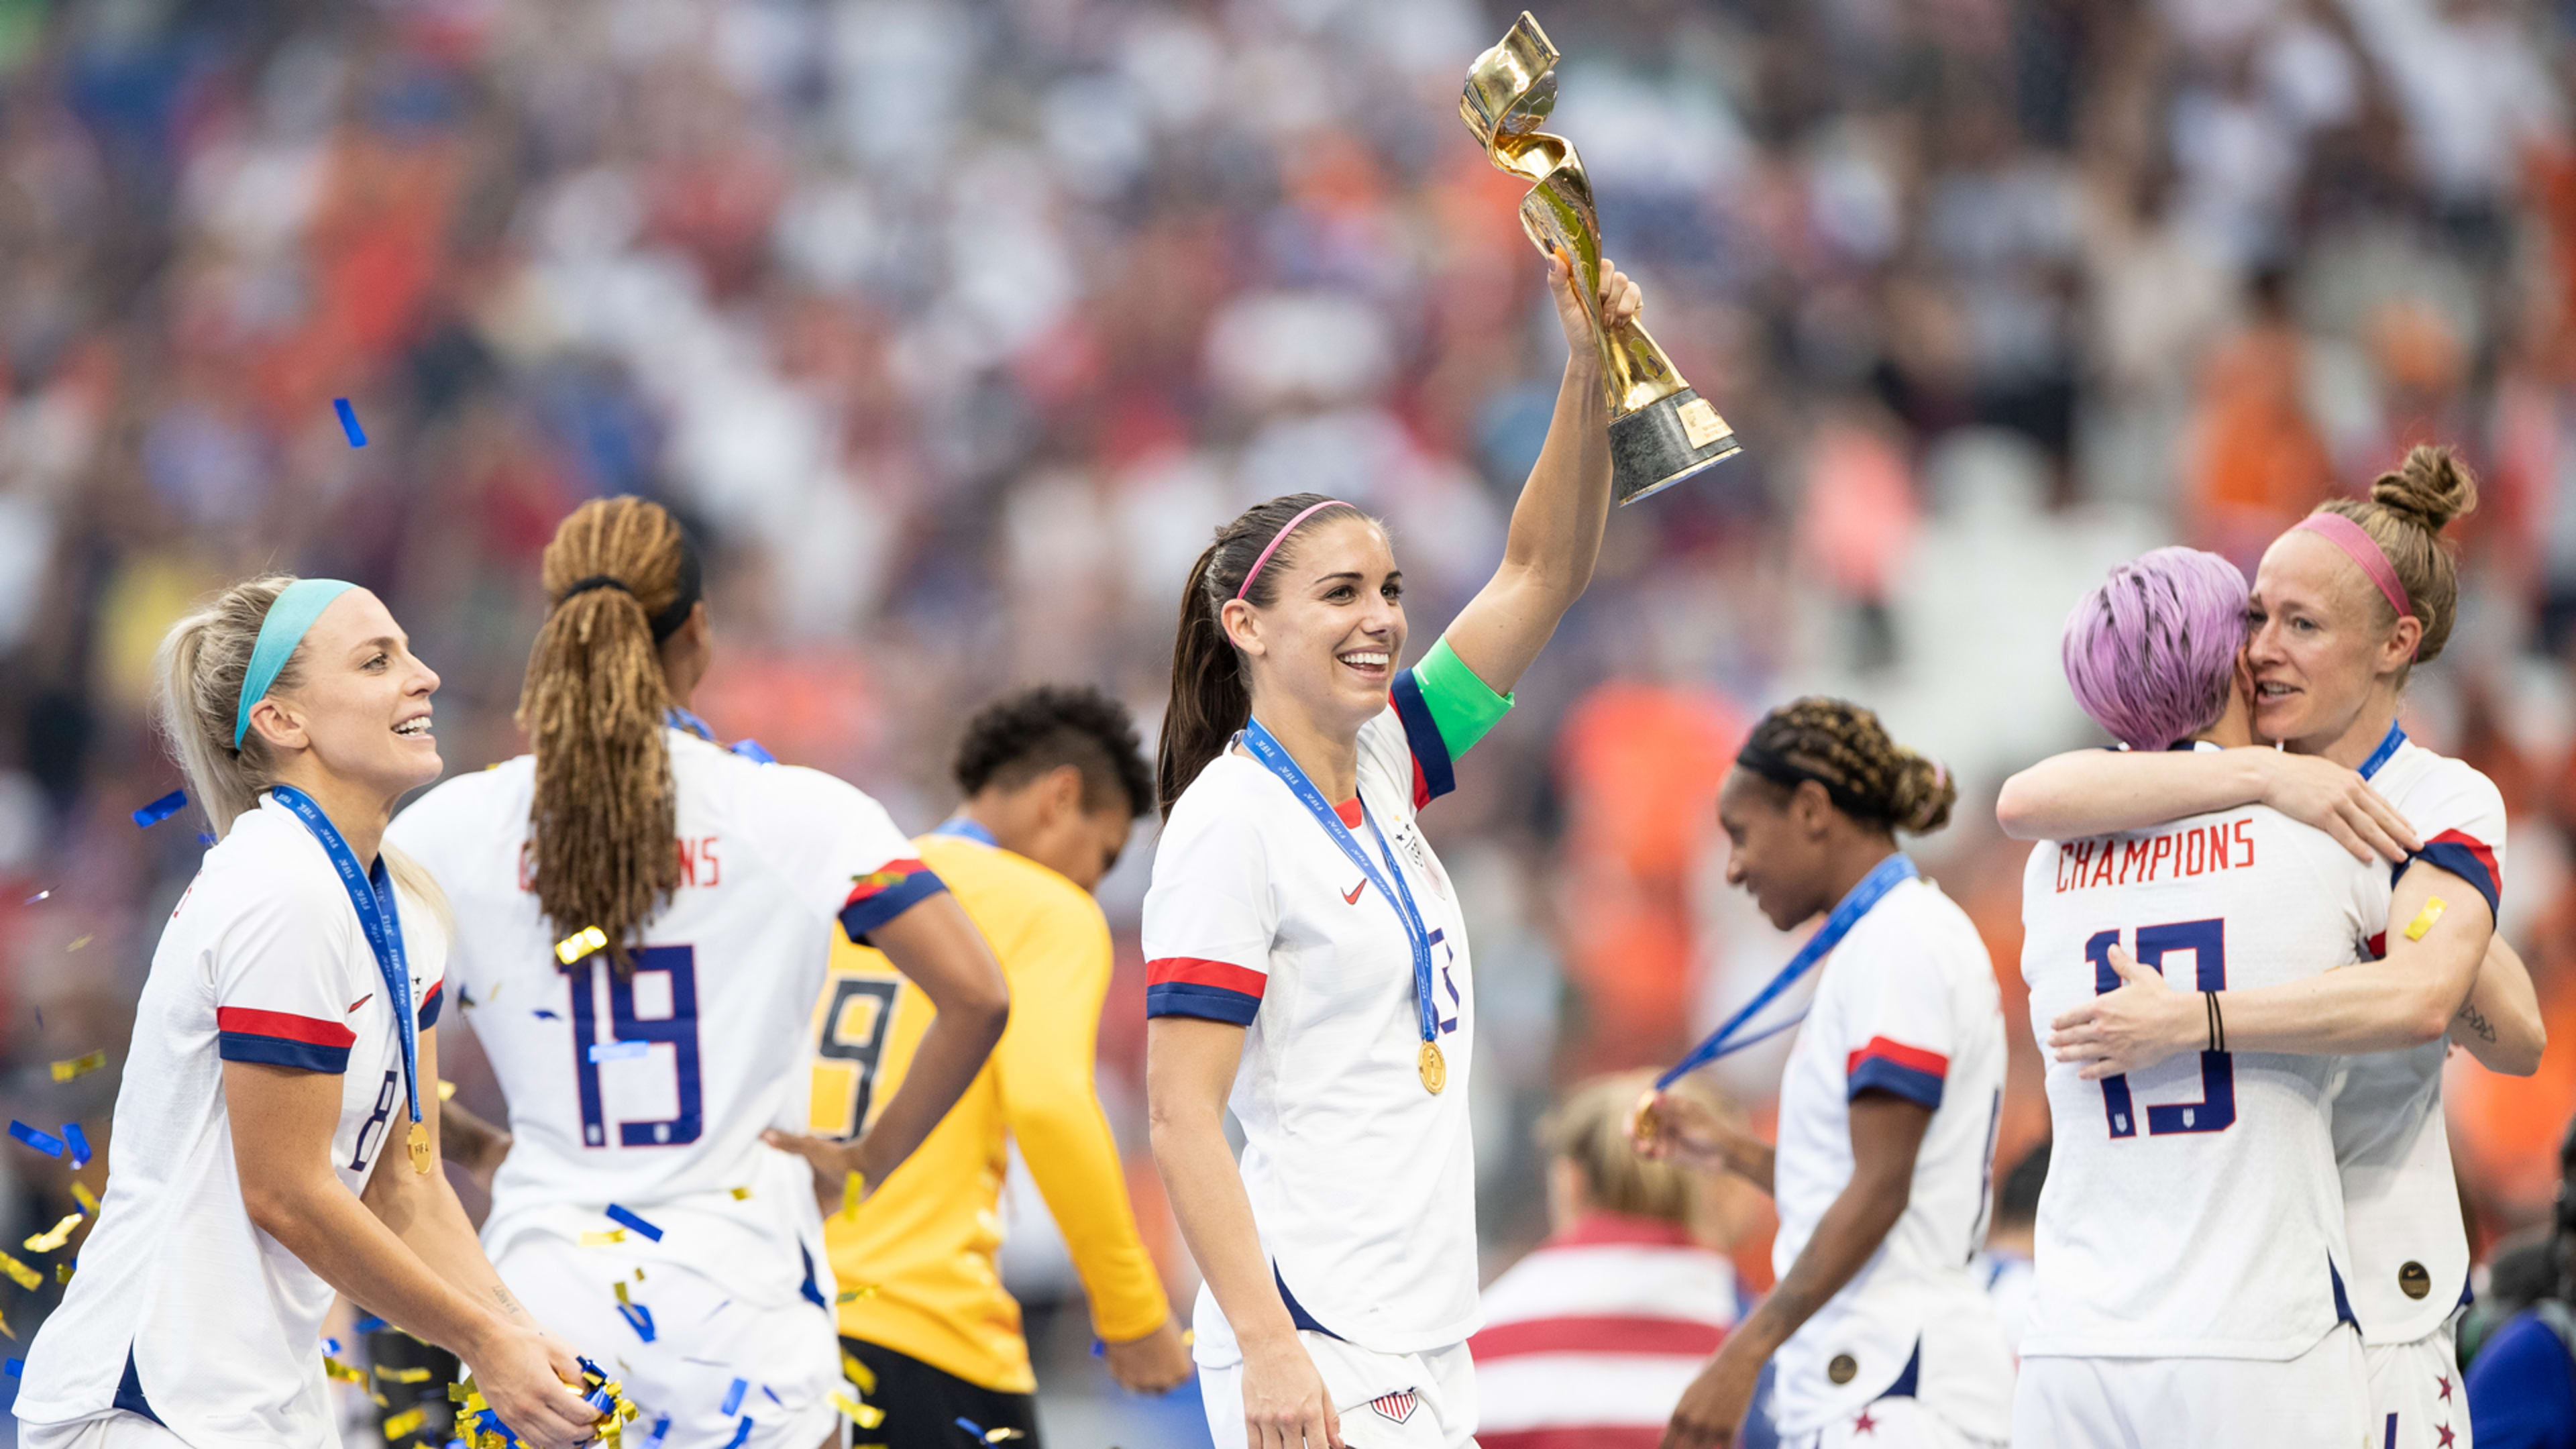 The U.S. women’s soccer team just smashed another myth about the gender pay gap in sports